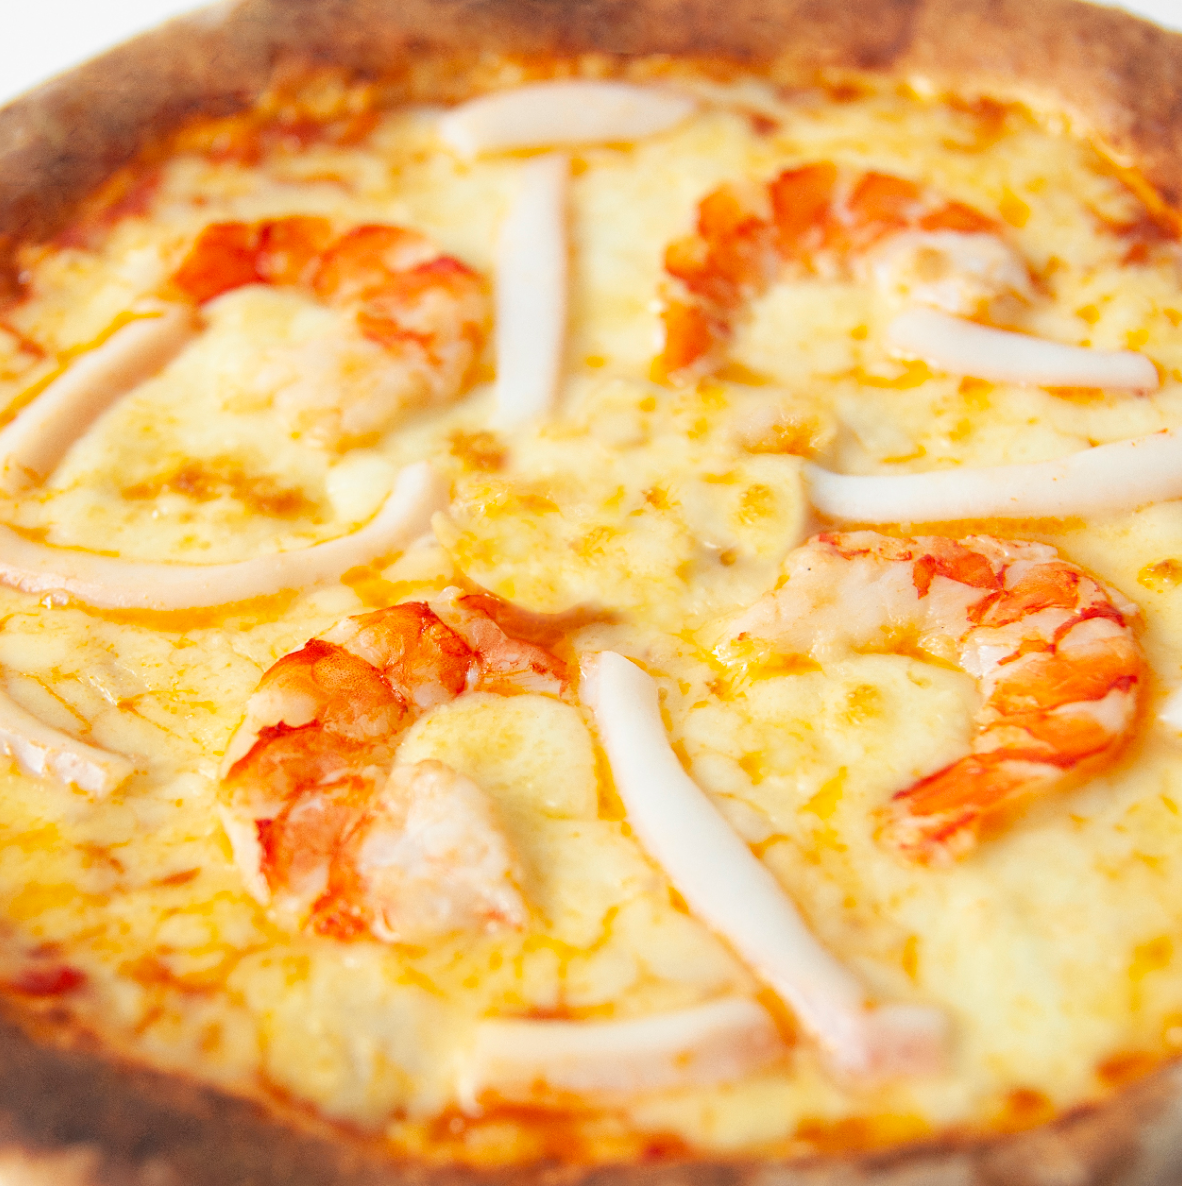 Seafood Pizza (18cm, 2 servings)